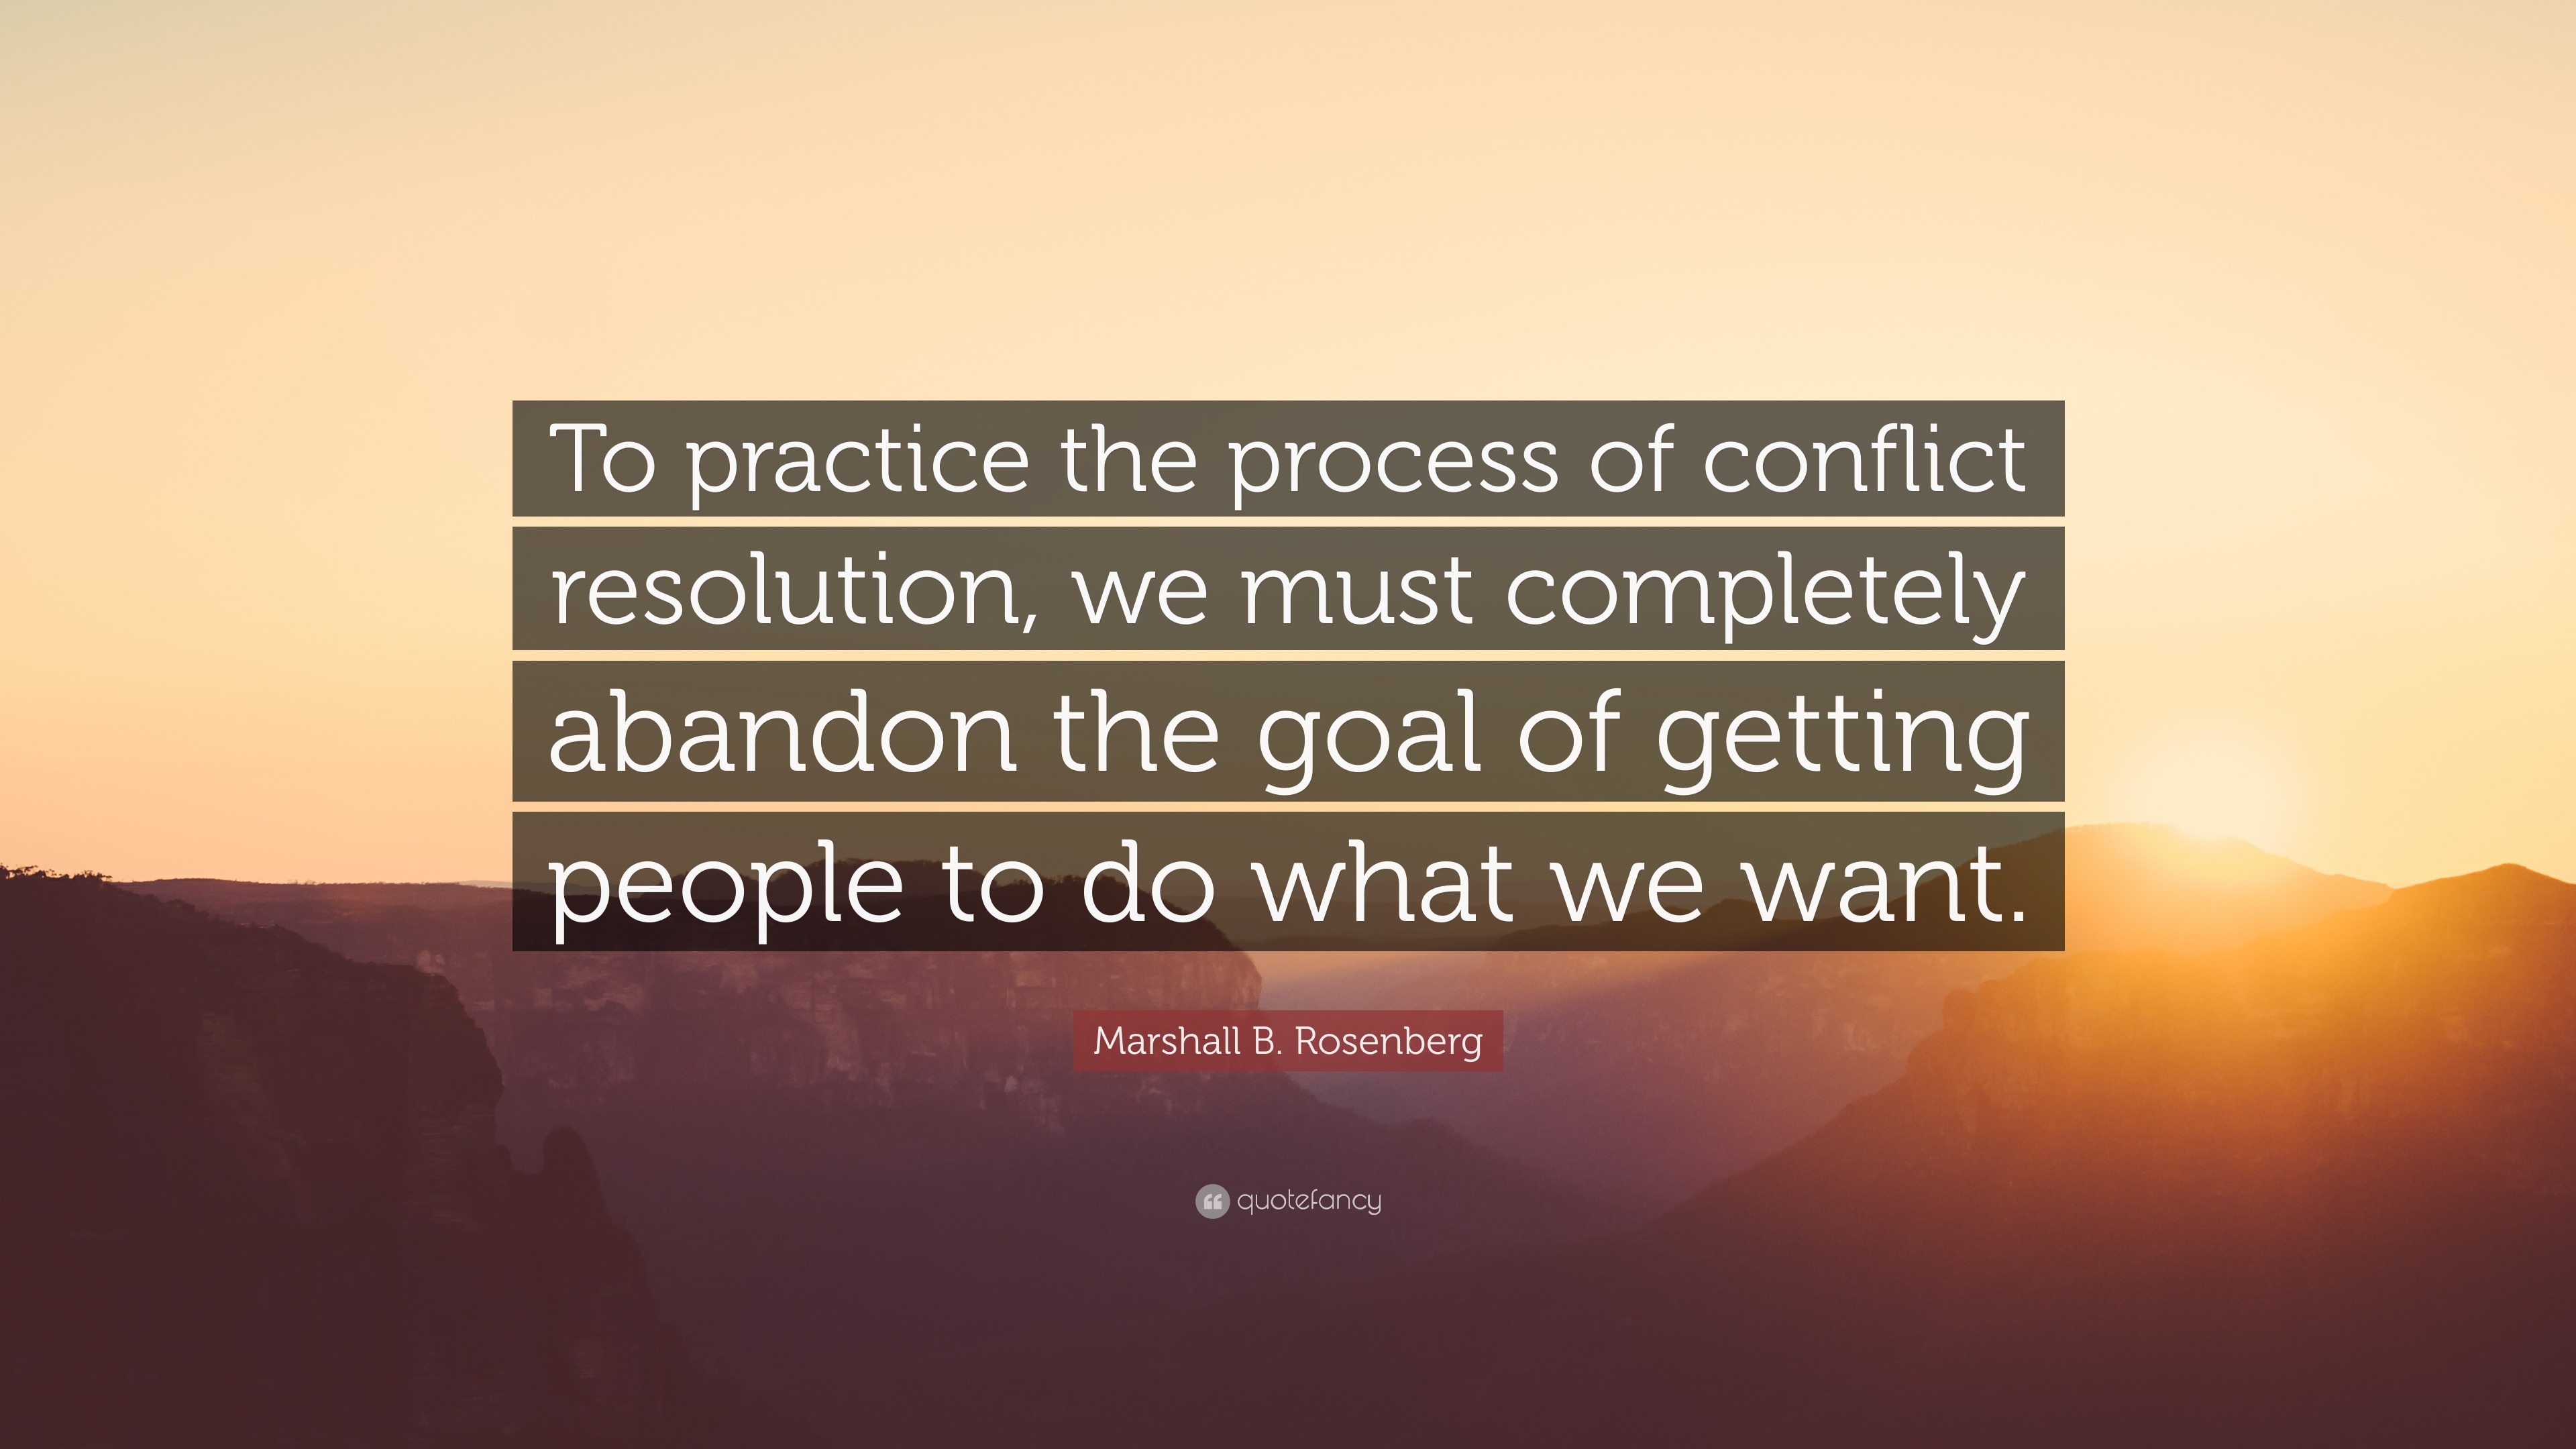 quote about global conflict mediation